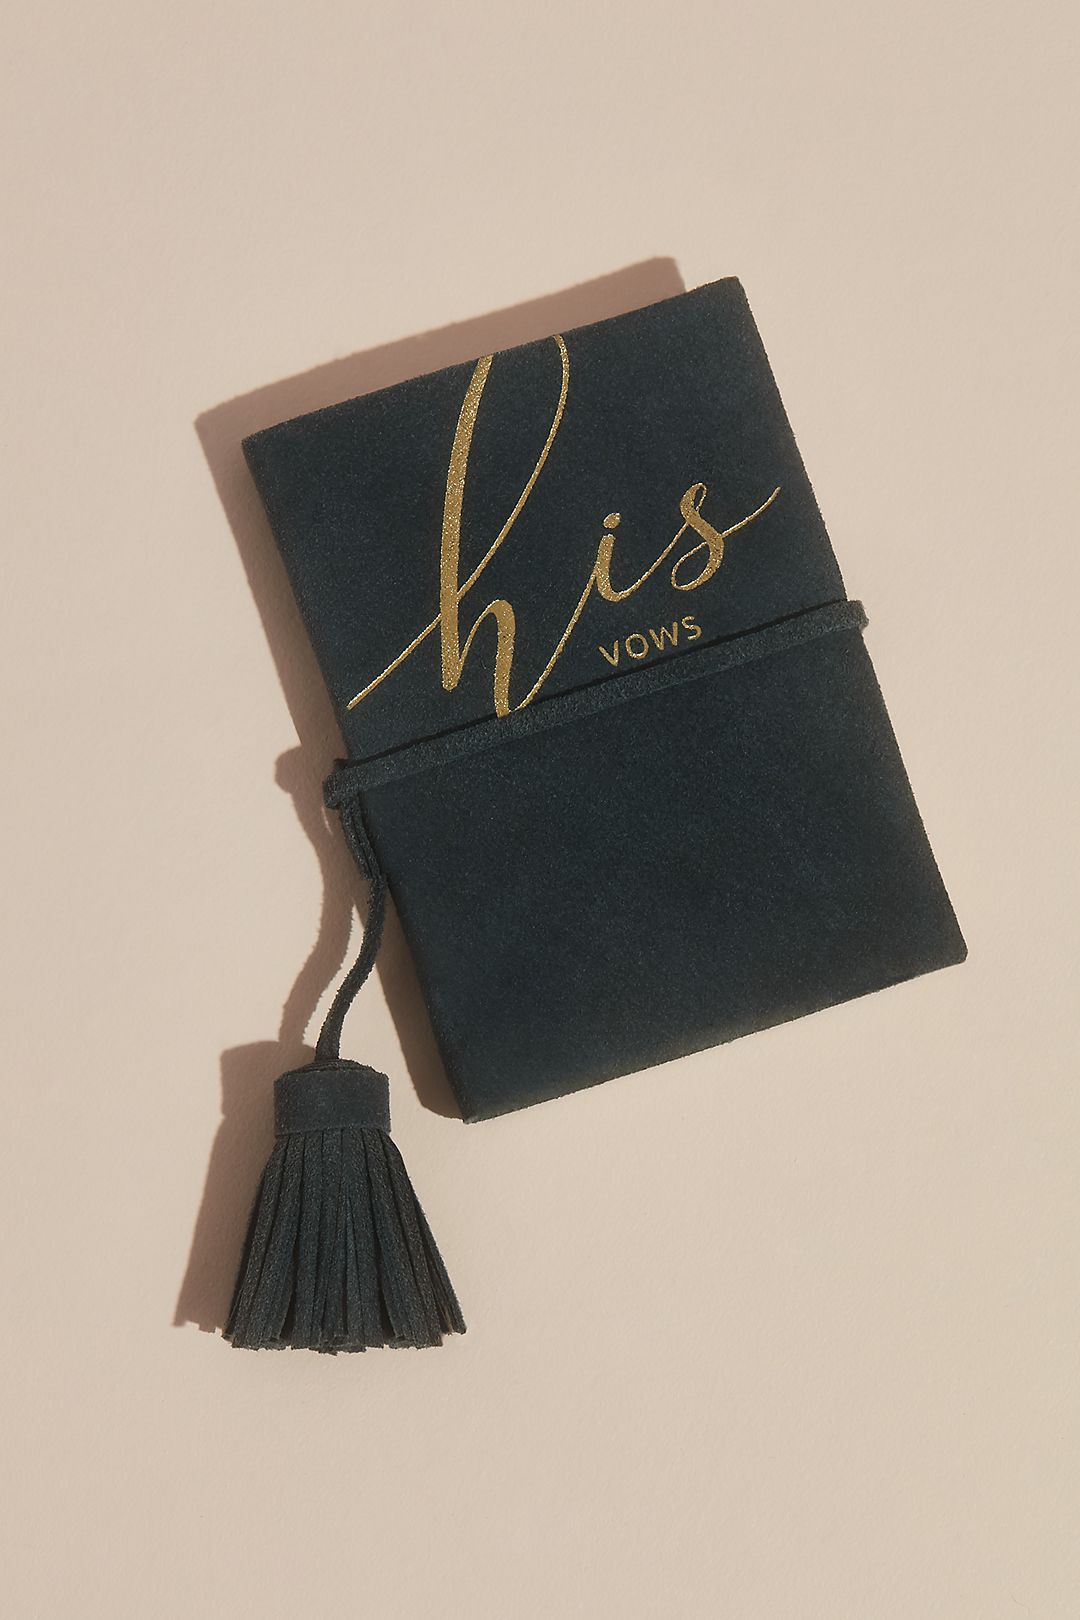 Suede His Vows Vow Book with Tassel Image 1